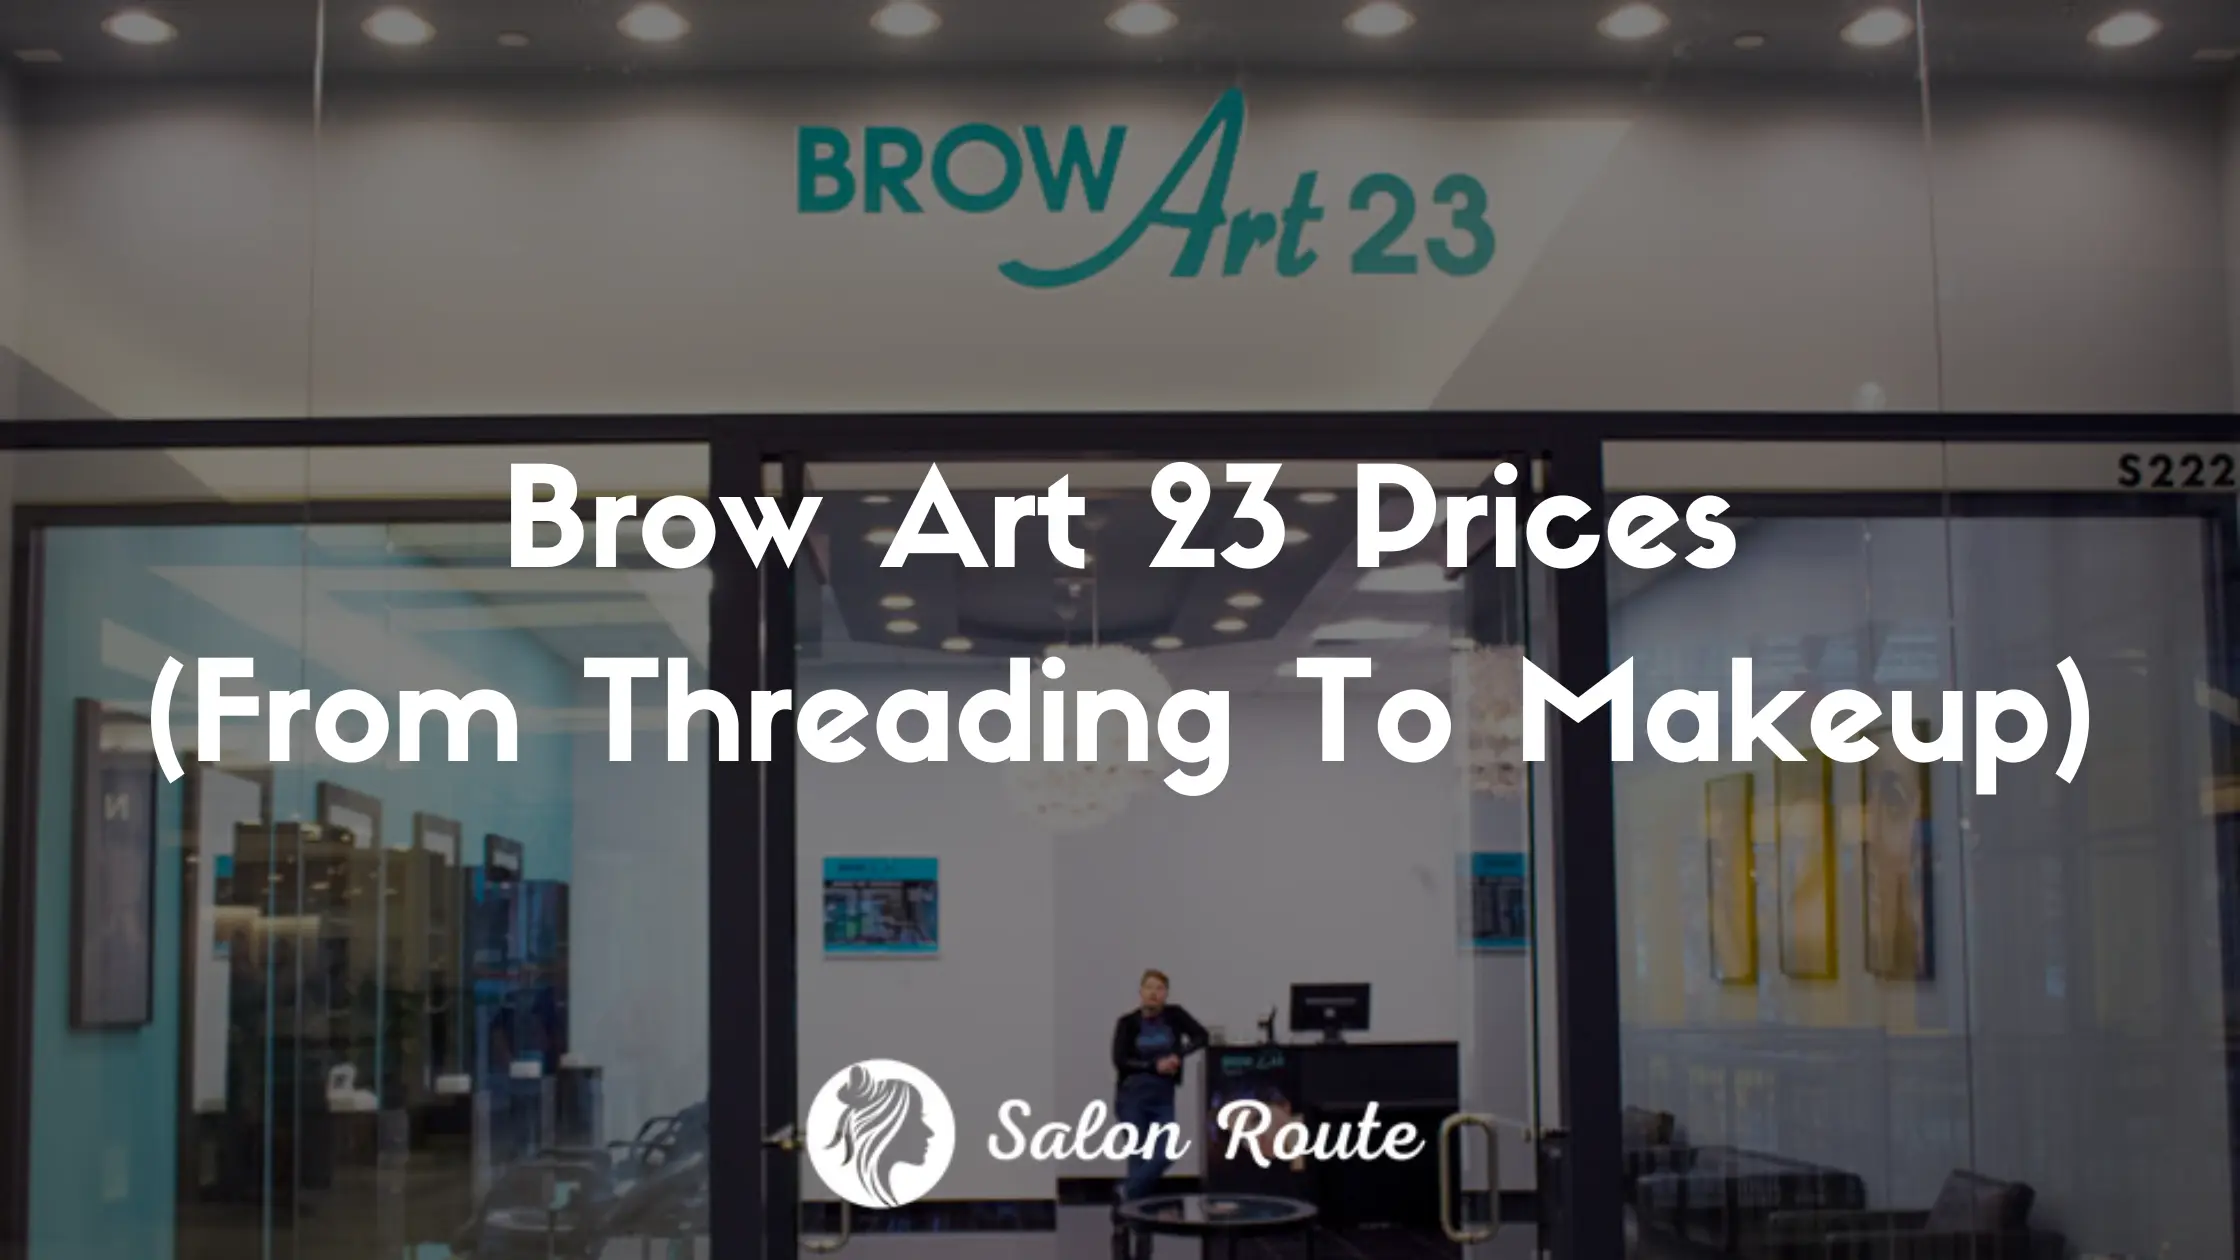 Brow Art 23 Prices (From Threading To Makeup)